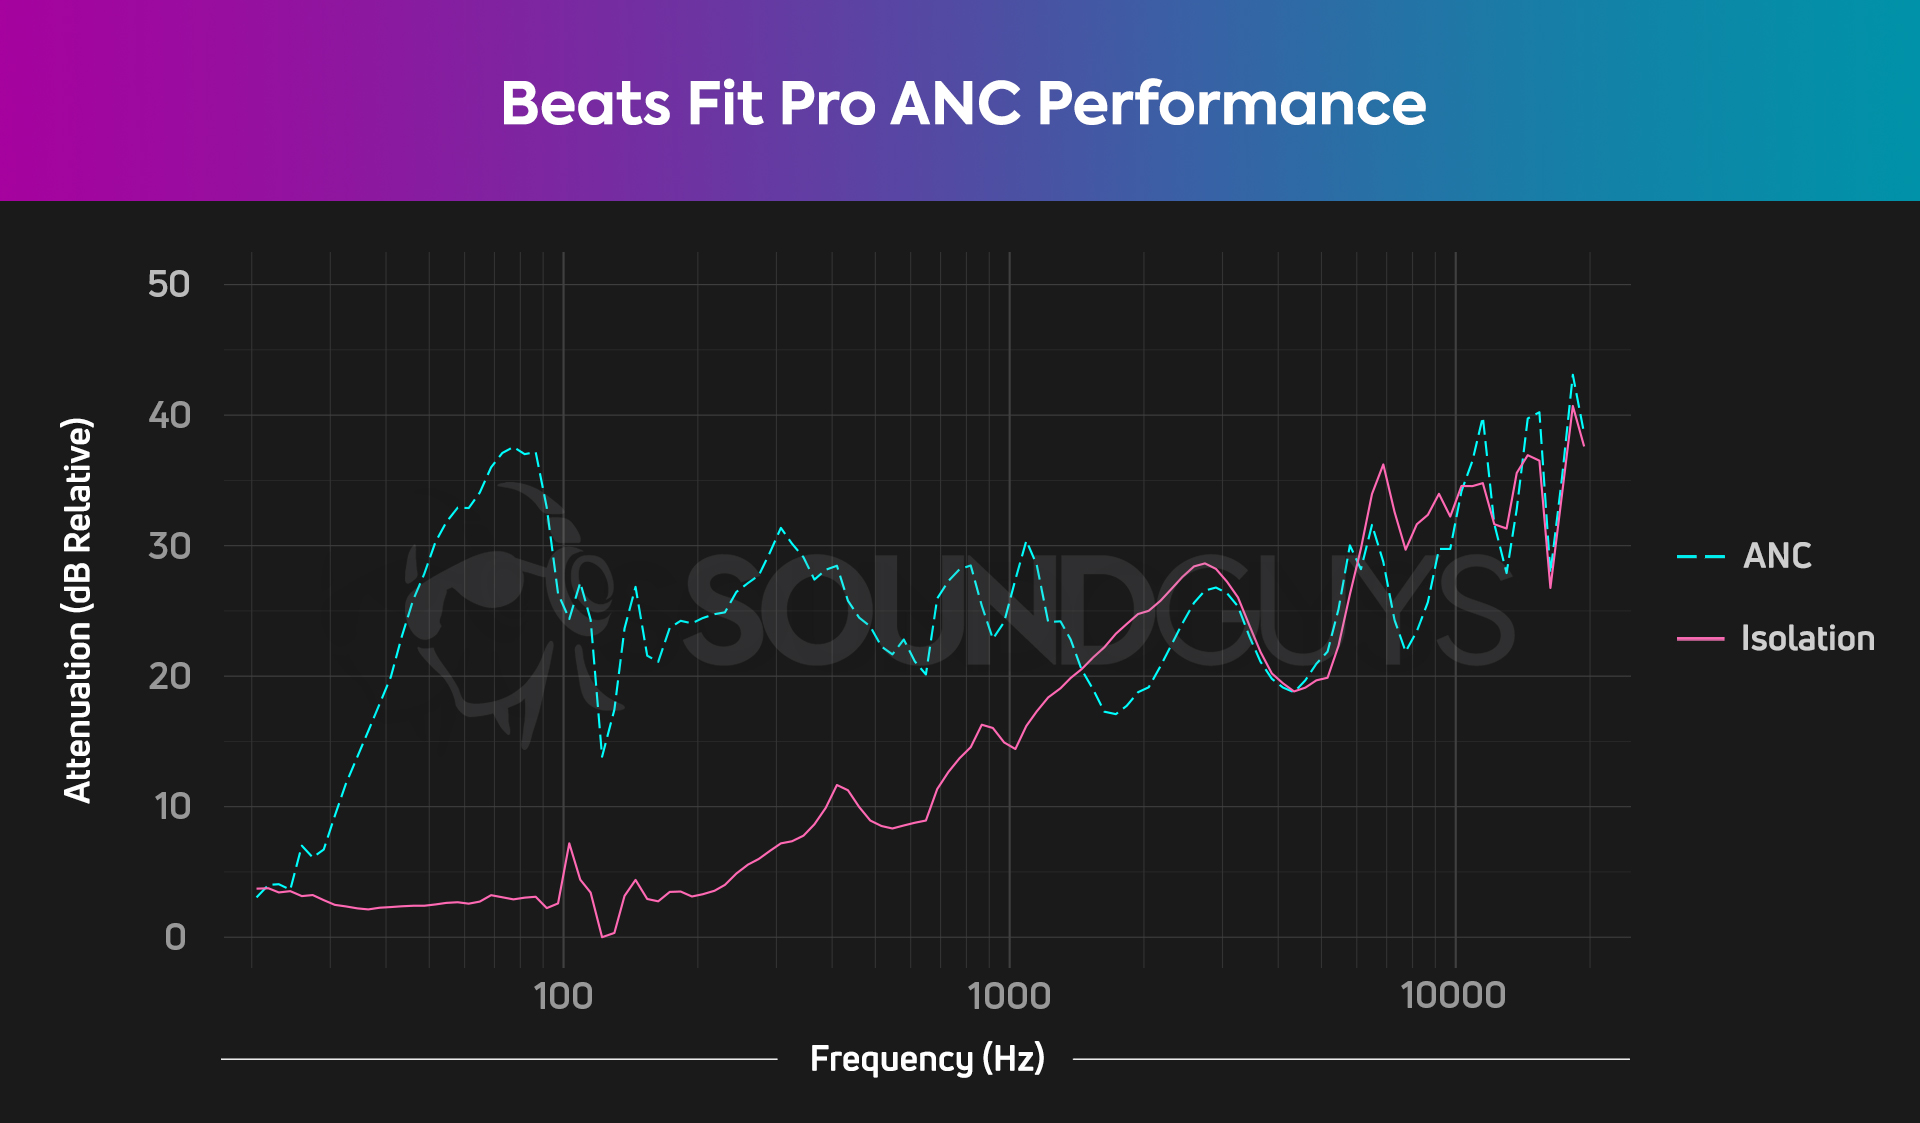 The Beats Fit Pro isolate fairly well, but also cancel a decent amount of noise.